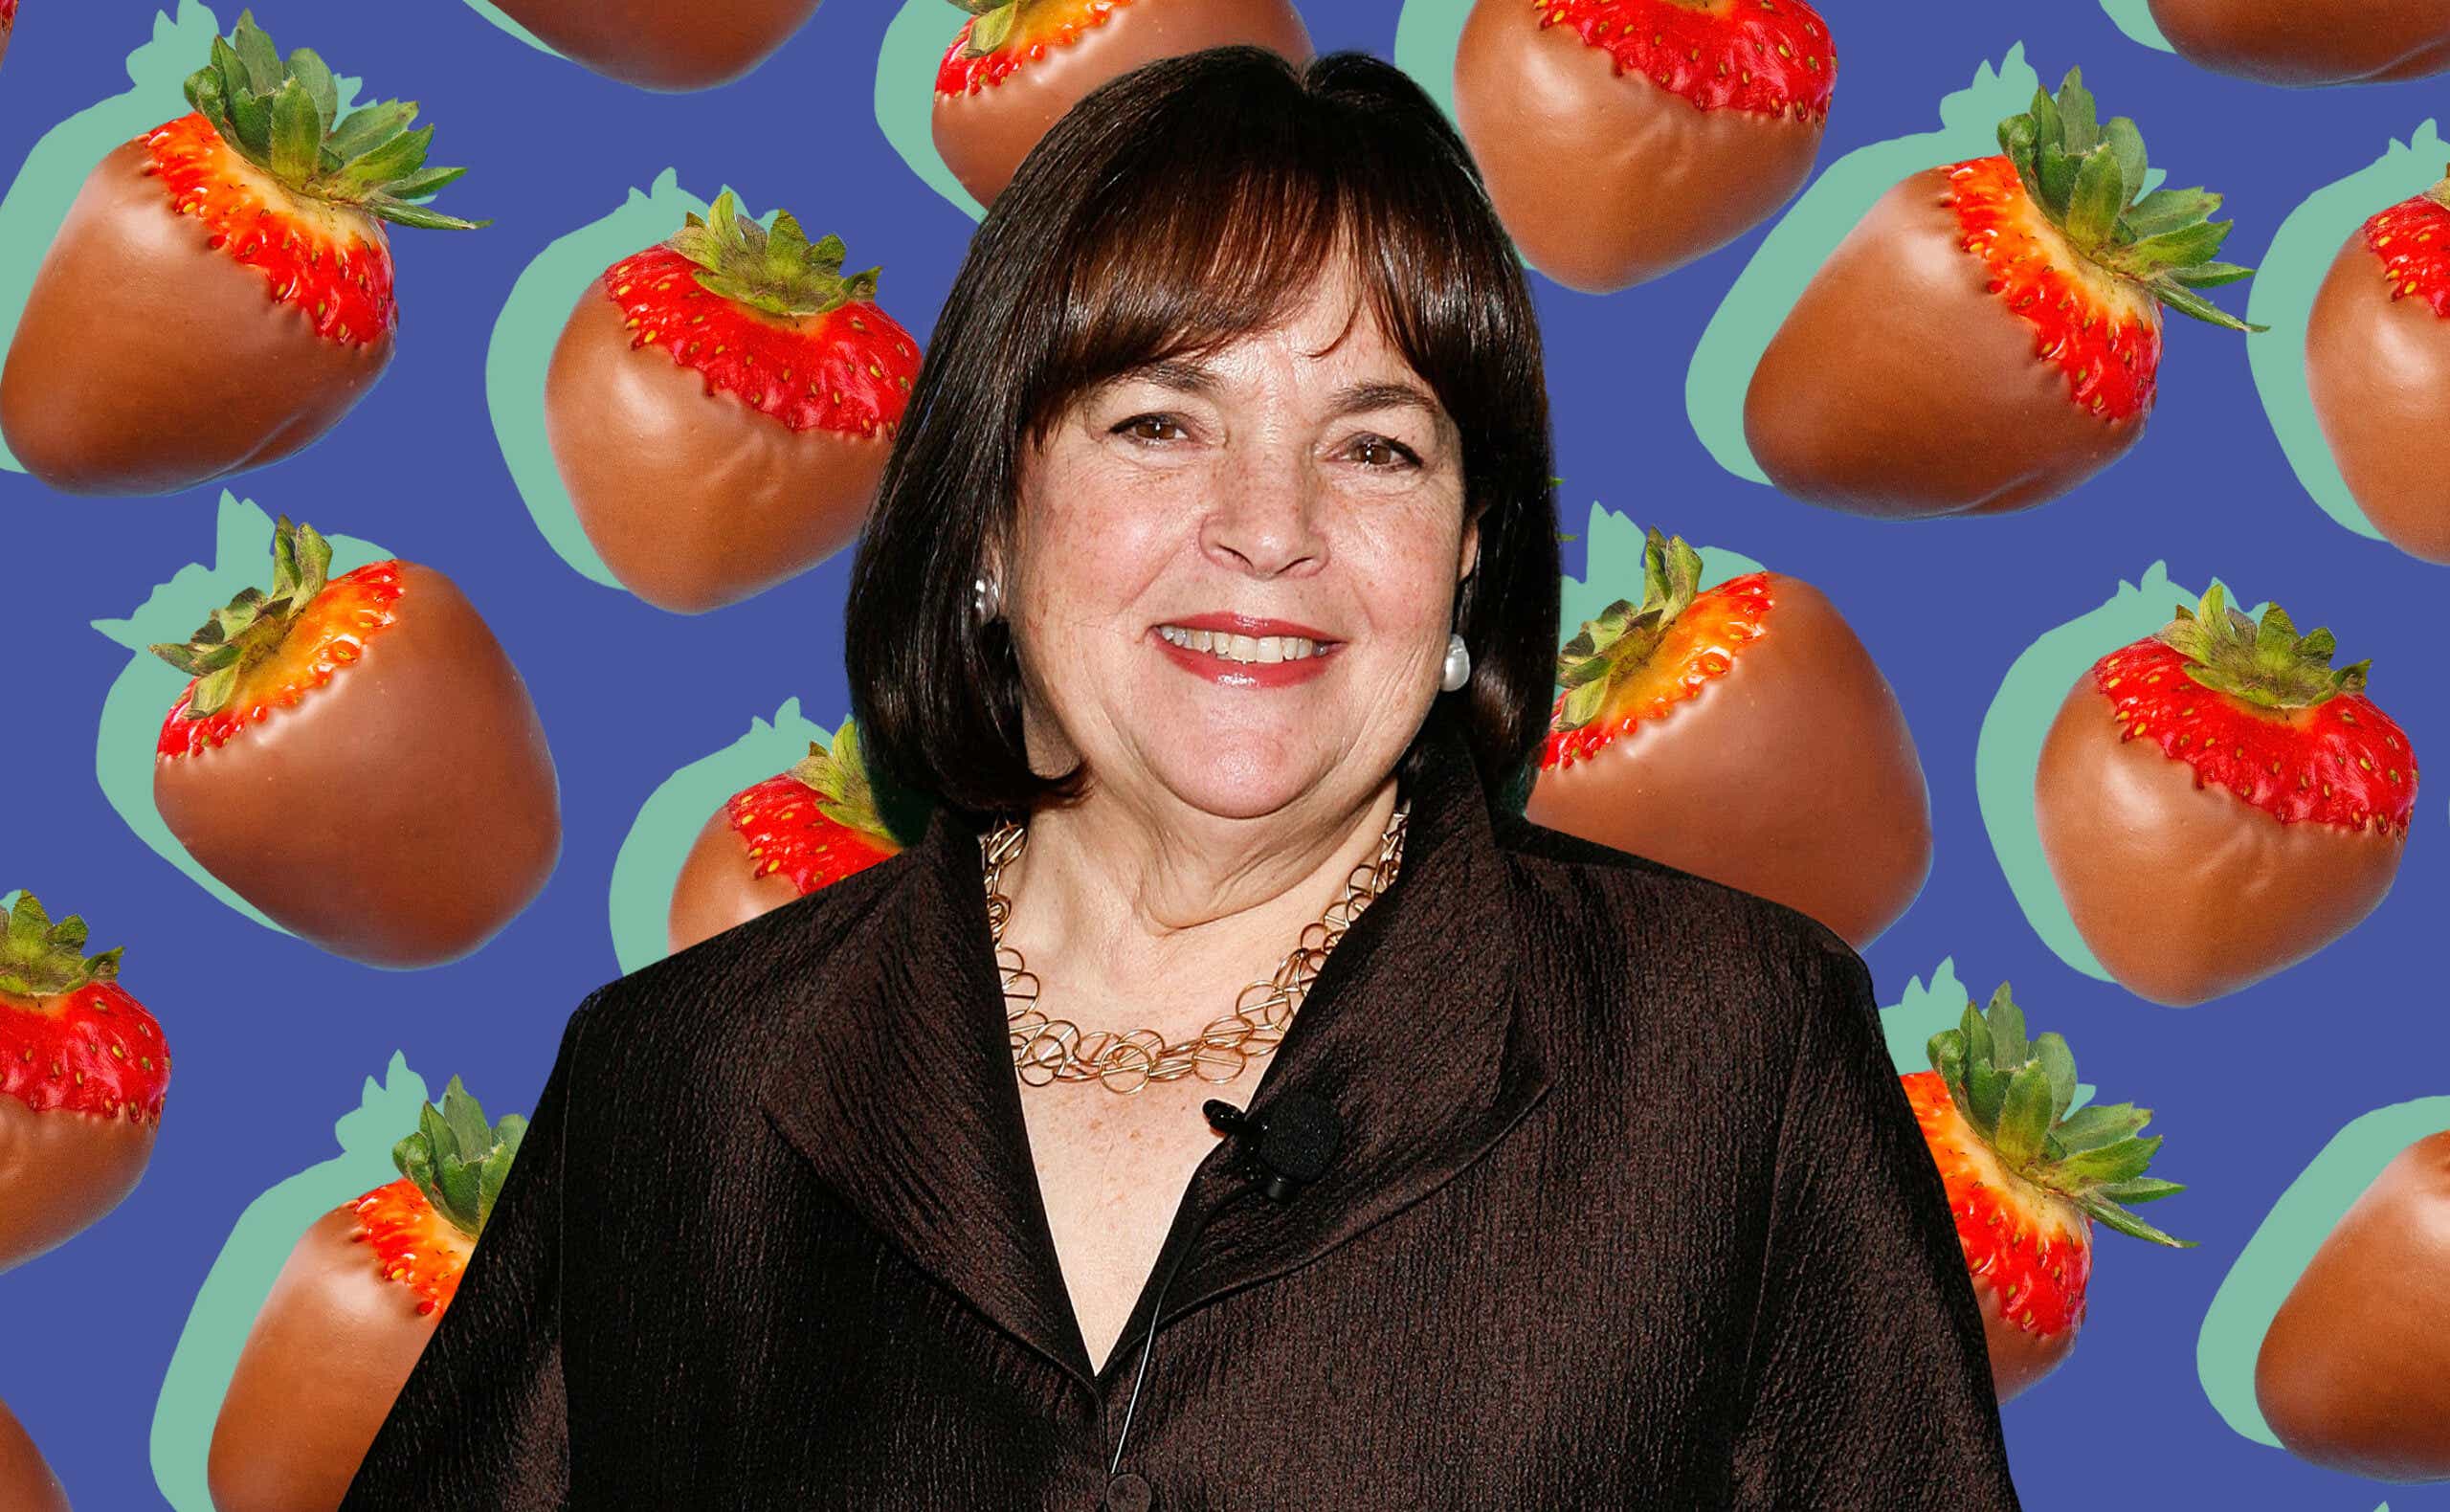 Ina Garten poses as a collage of chocolate strawberries floats behind her.